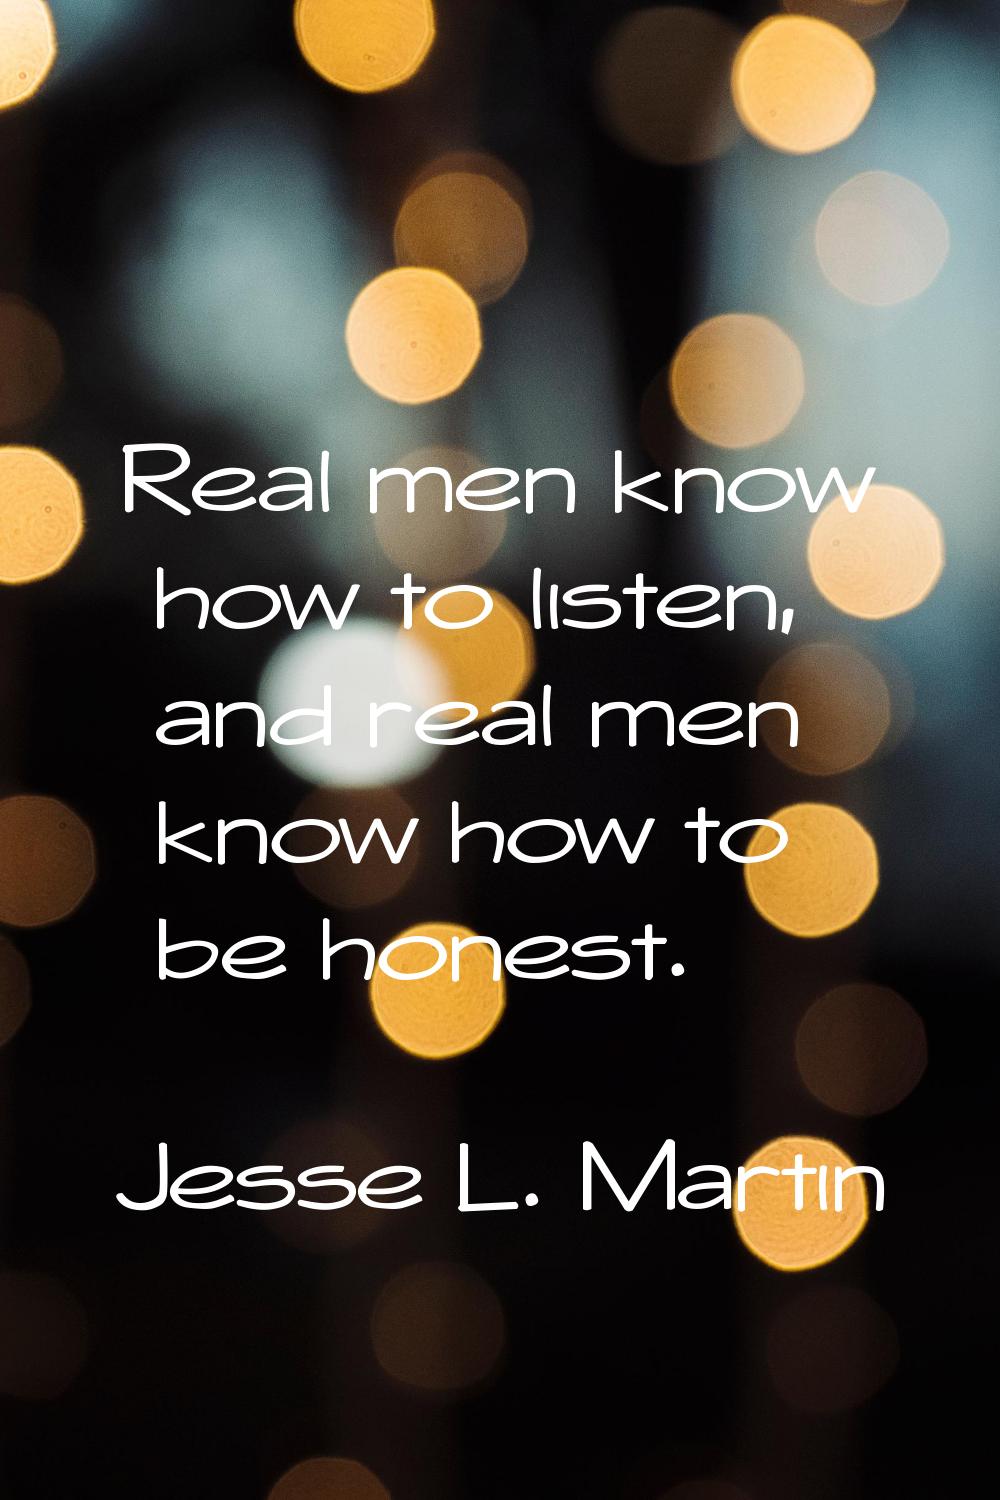 Real men know how to listen, and real men know how to be honest.